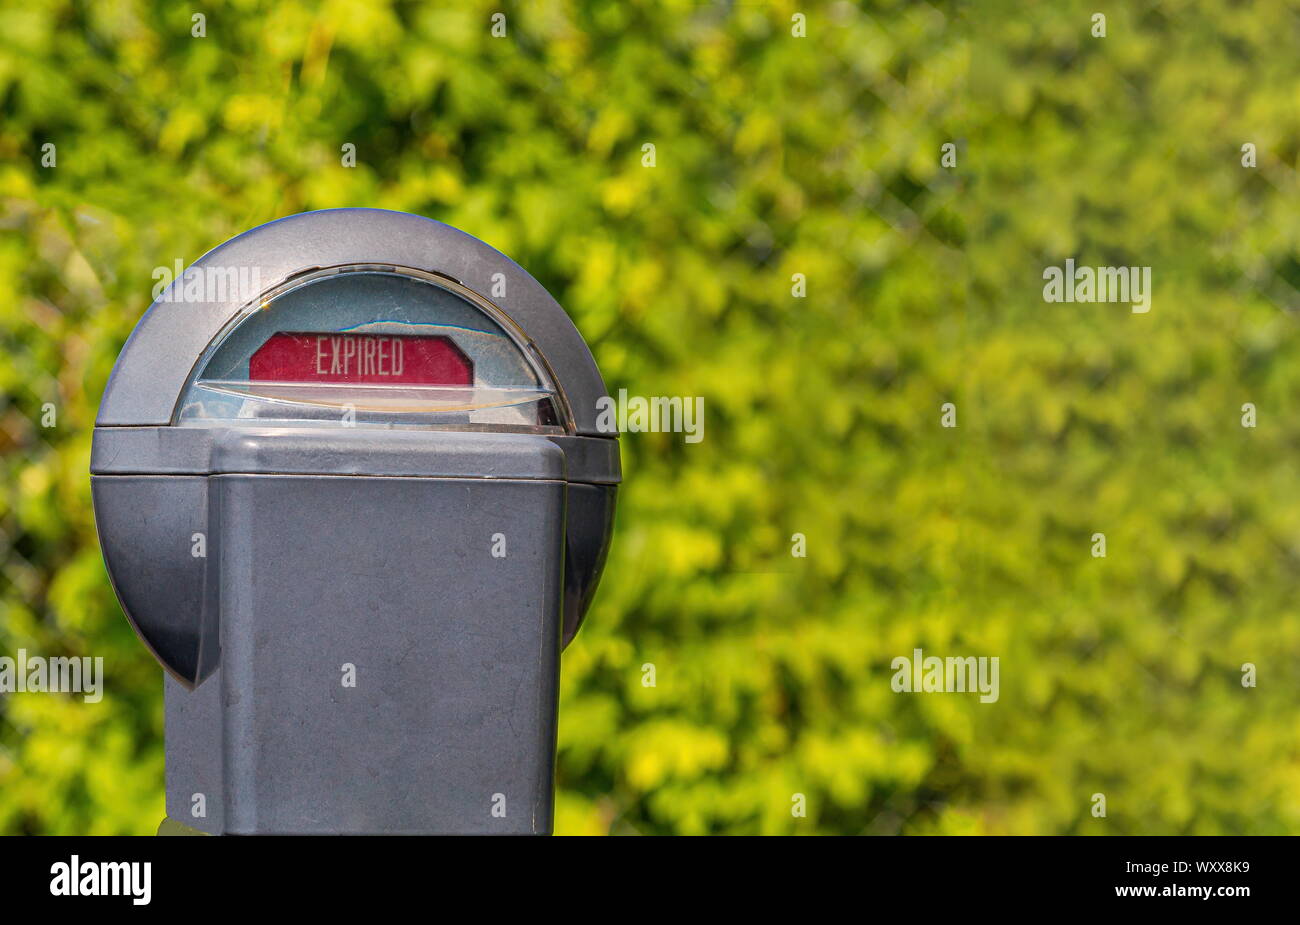 An Expired Parking Meter on a Green Background Stock Photo